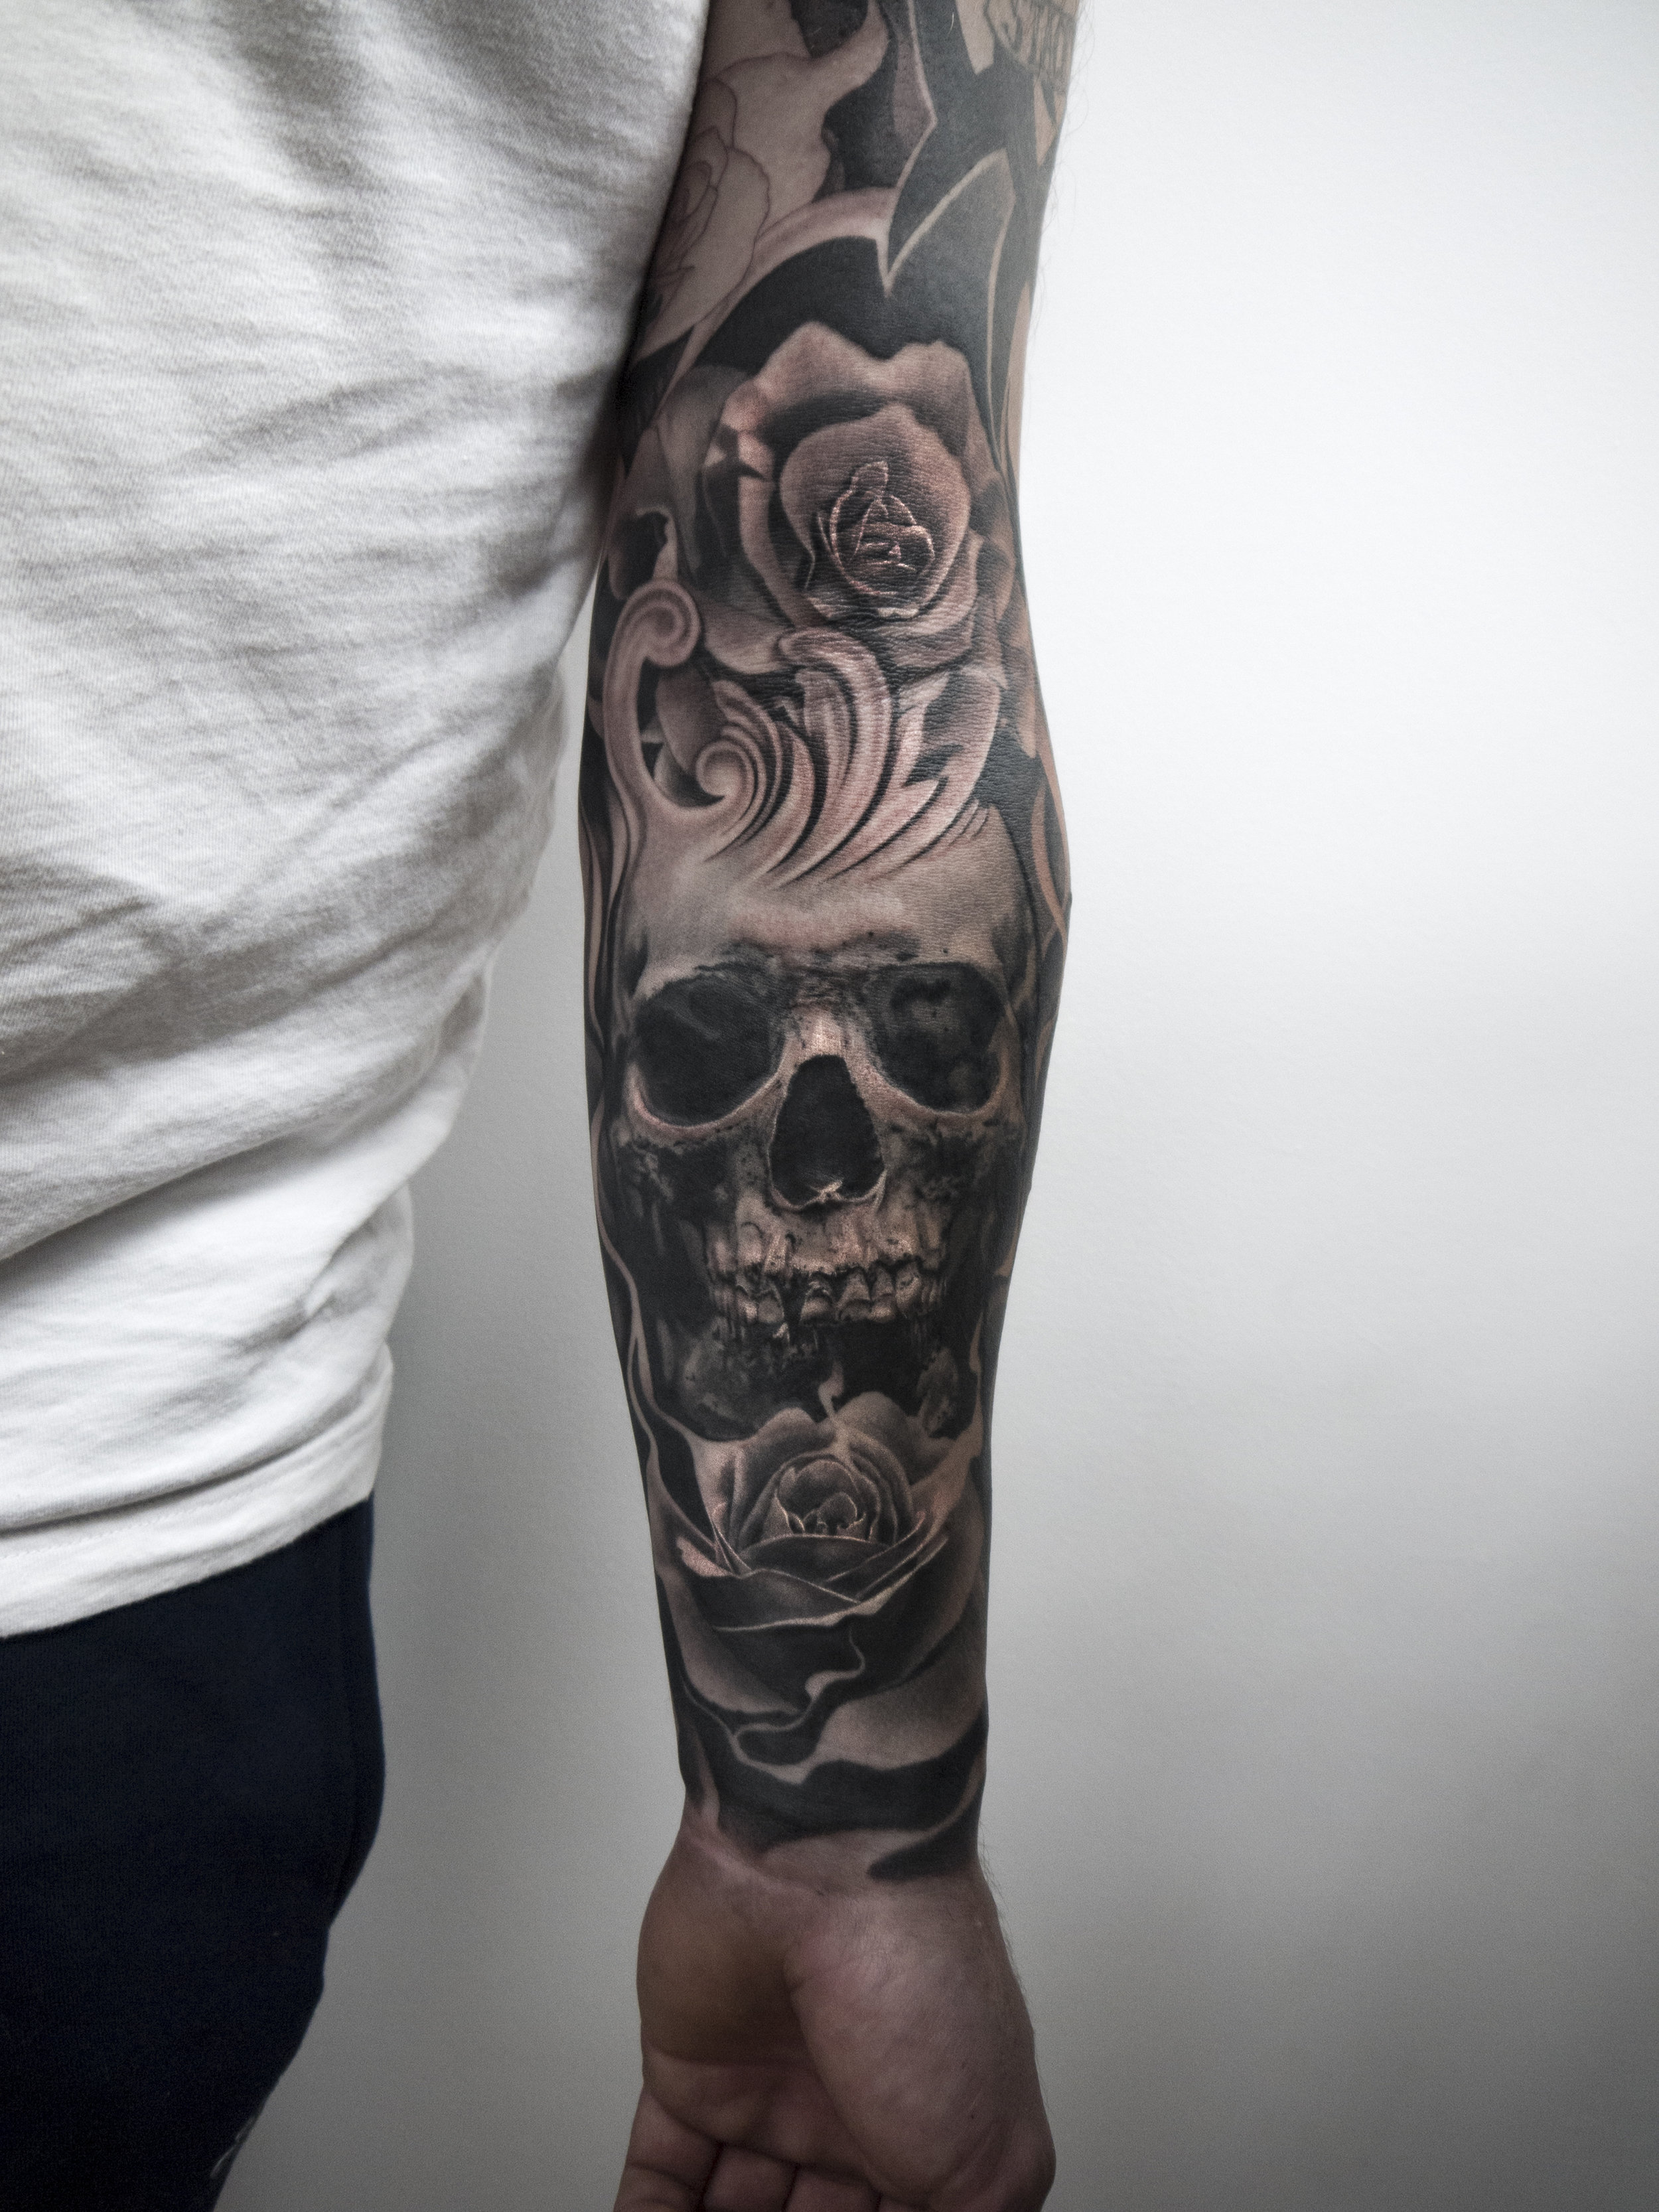 Cover up done by Alex Lysov from Skull Tattoos in Bad Vilbel Germany  r tattoos